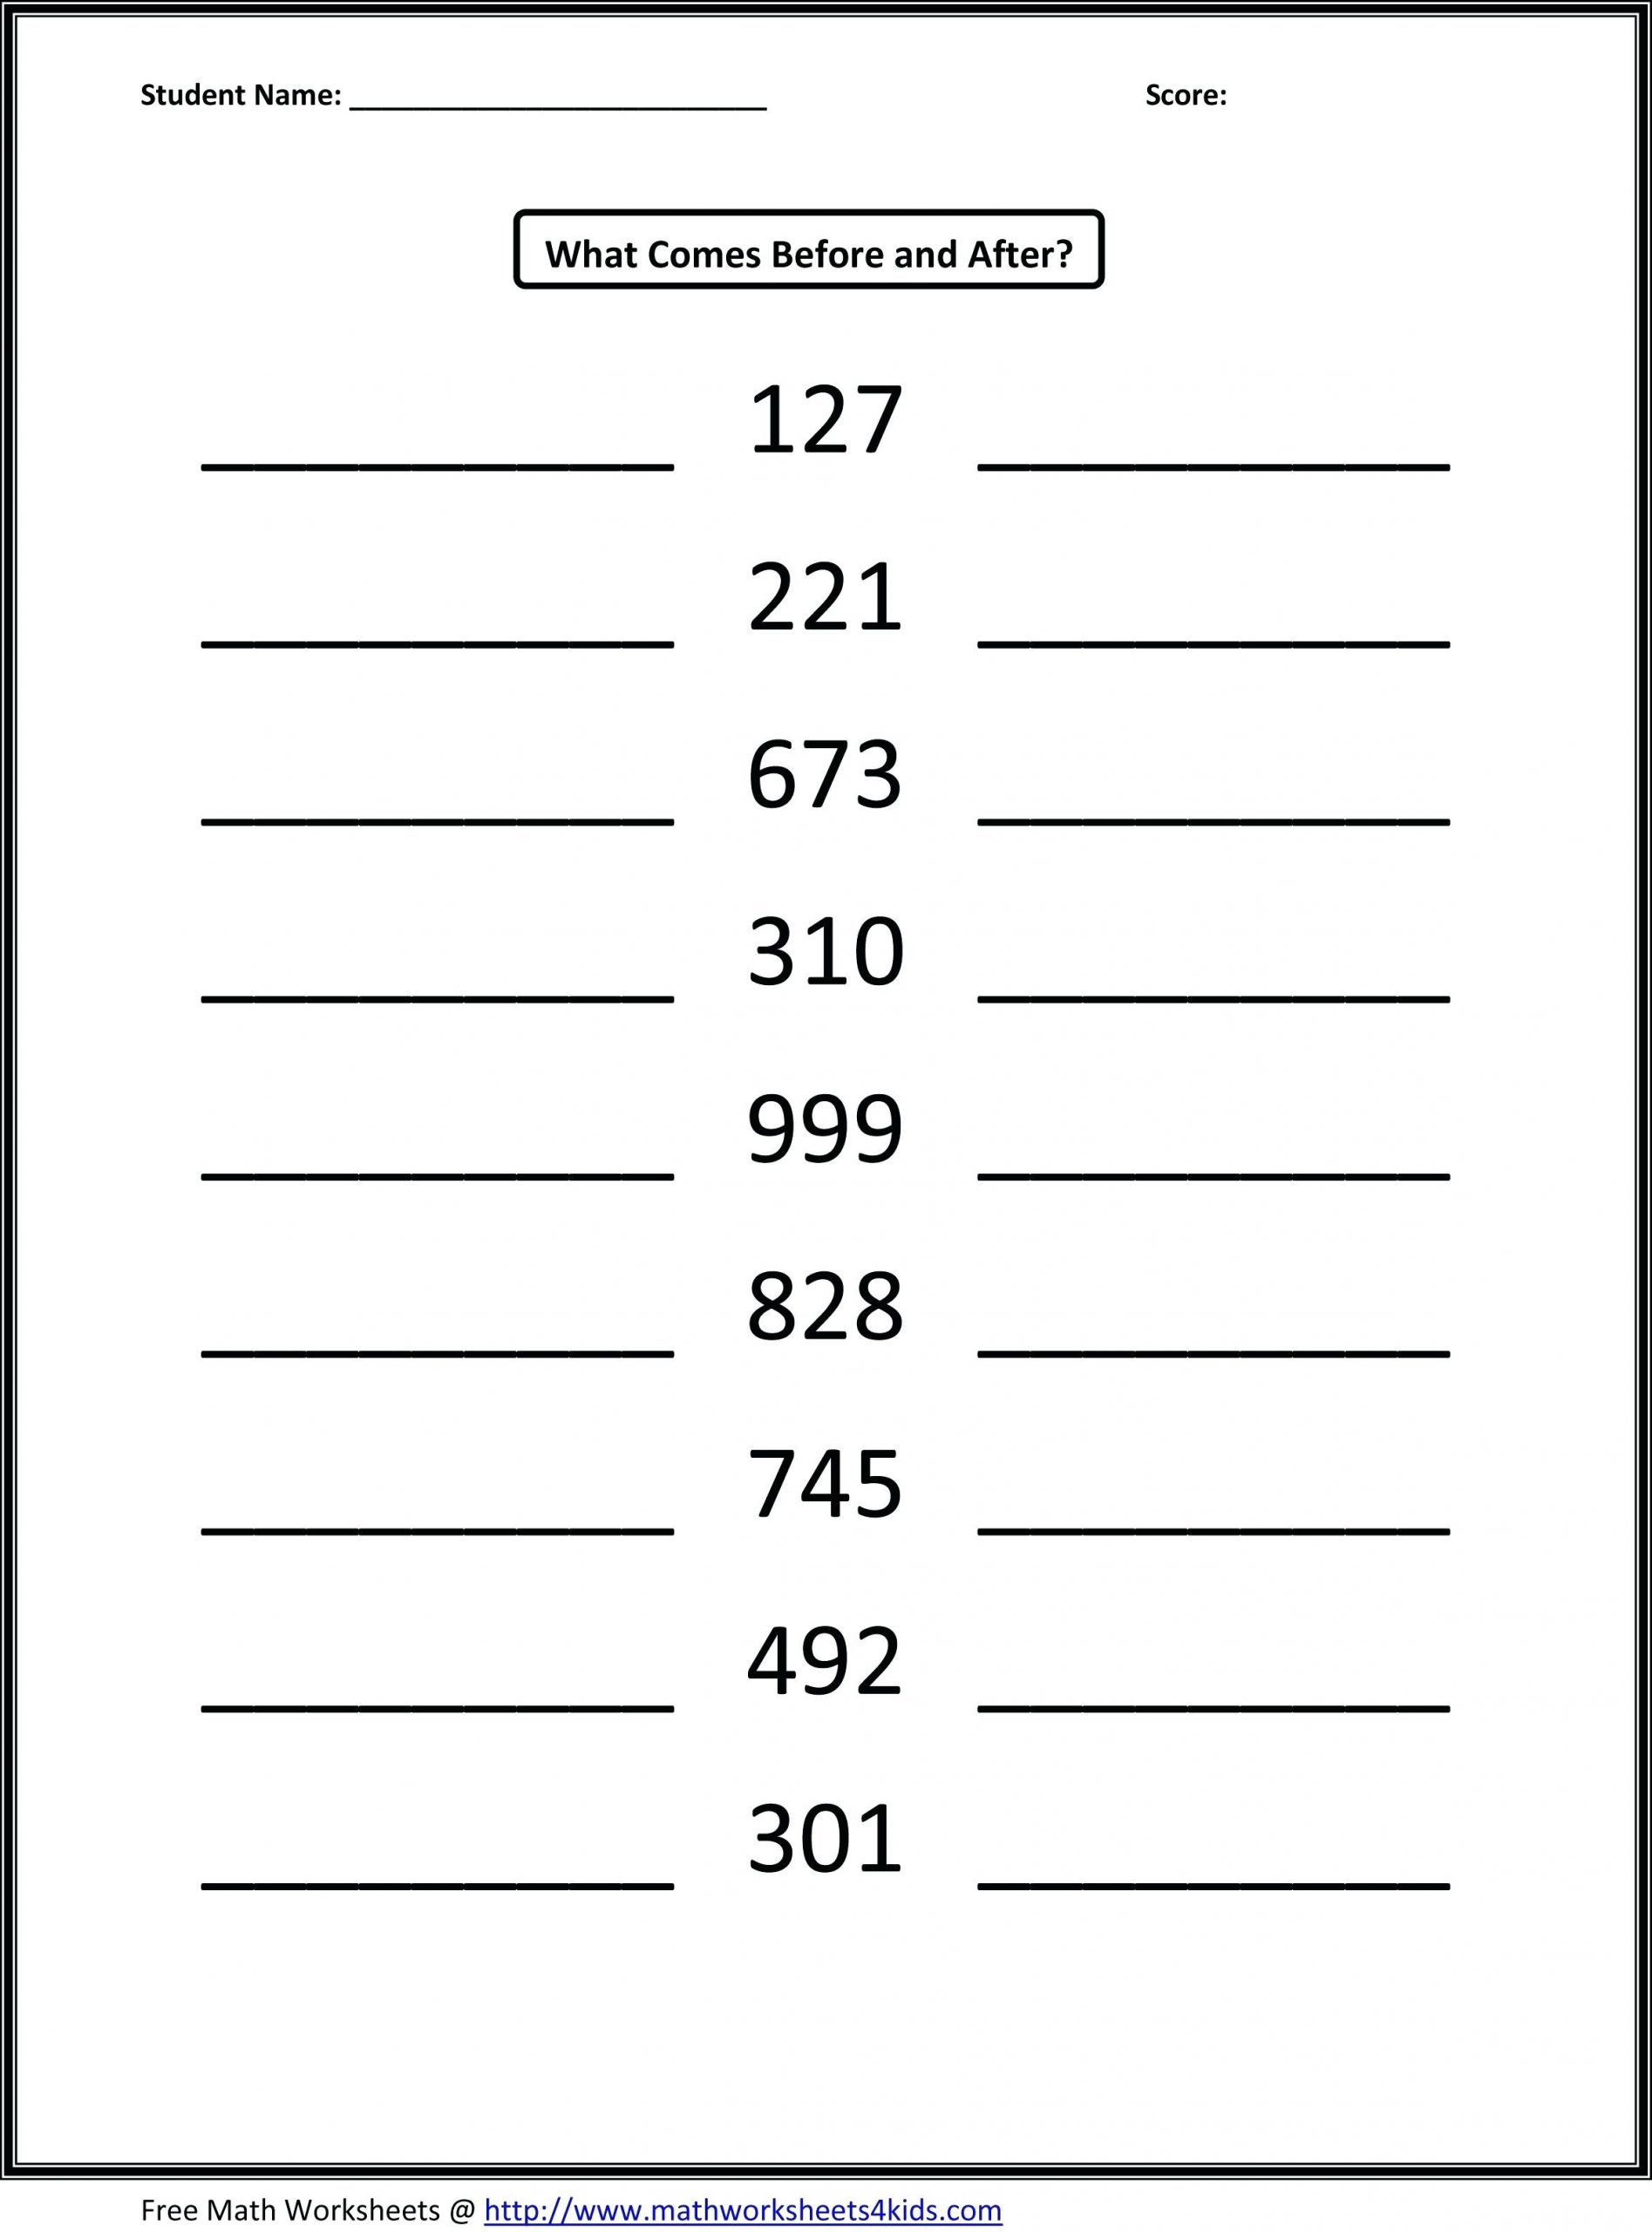 place value worksheets 2nd grade to print